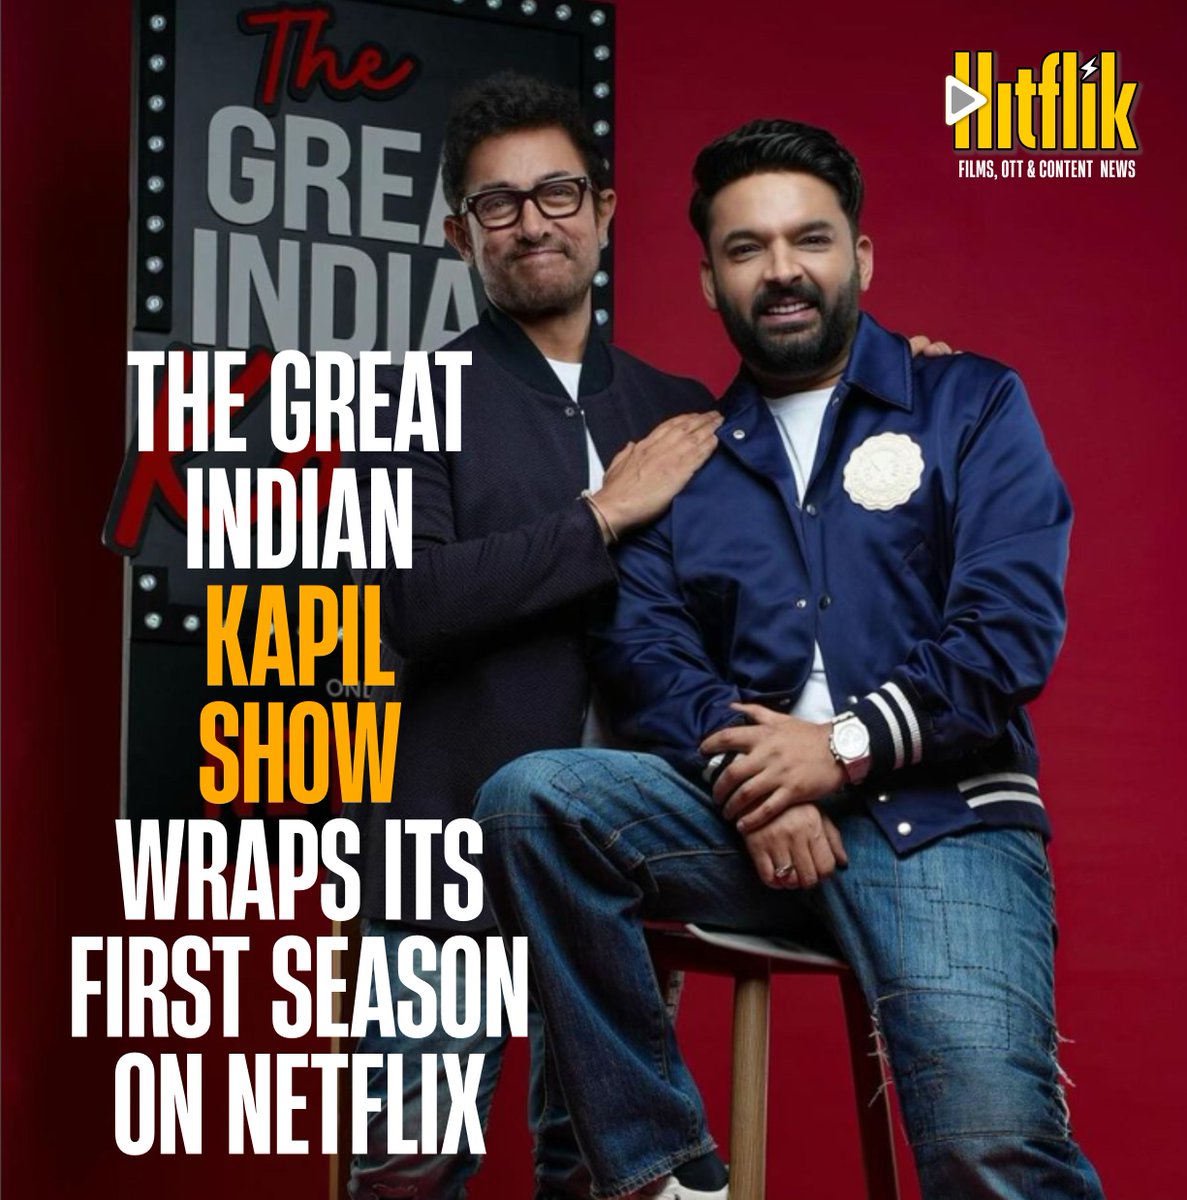 It's a wrap for #KapilSharma's #Netflix extravaganza! #ArchanaPuranSingh confirmed the news, sending waves of excitement and nostalgia through the fandom.

In just two months, the show has left an indelible mark with its stellar lineup of guests and endless moments of laughter.